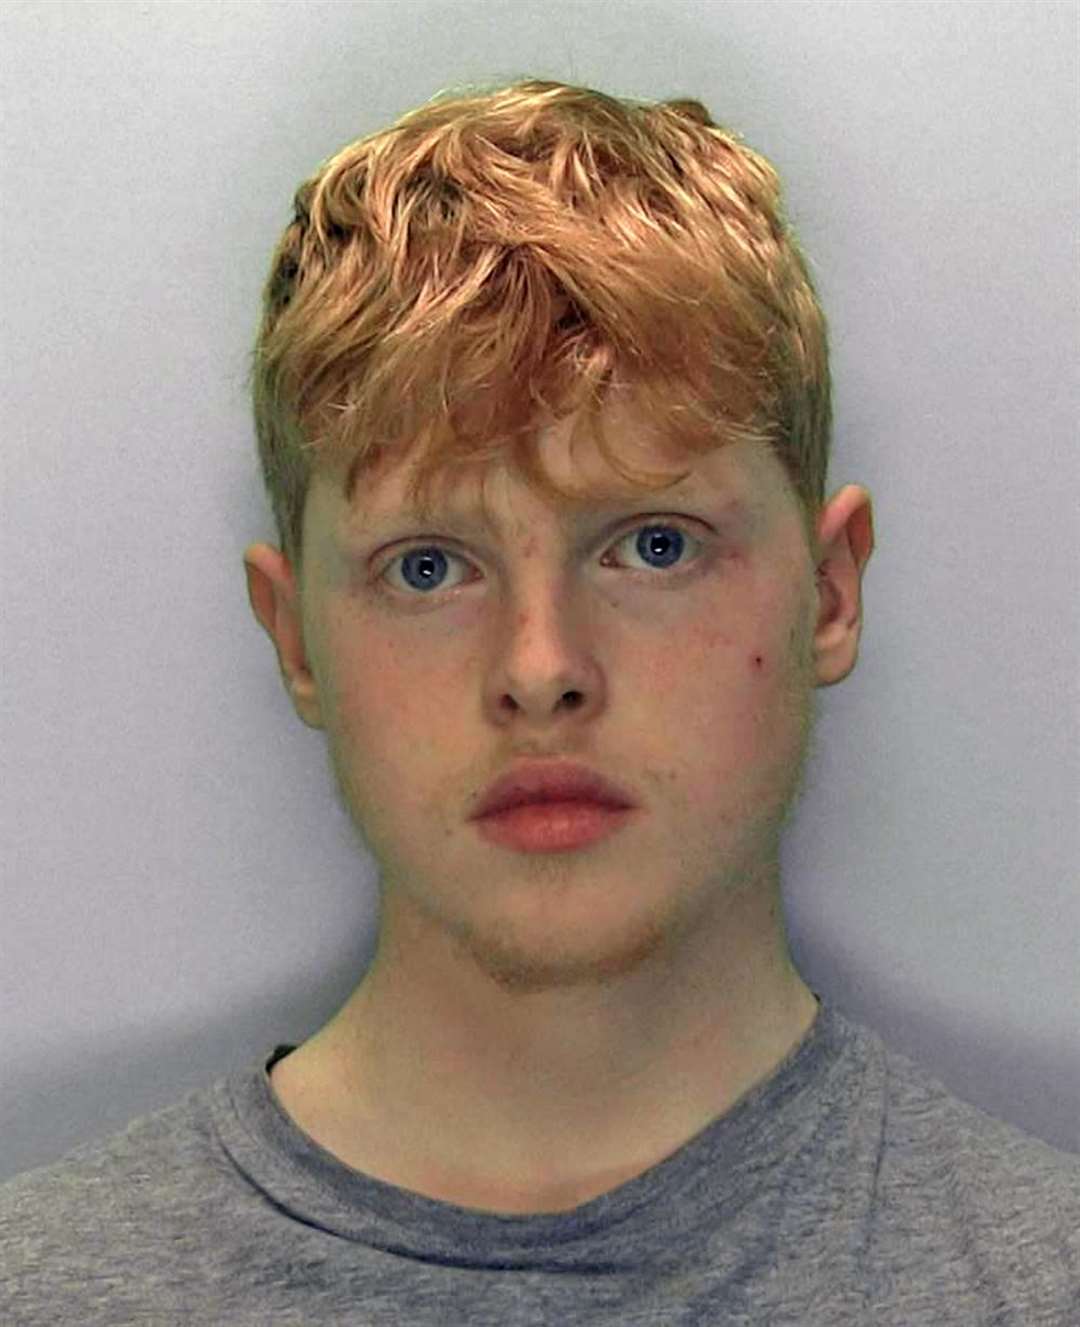 Oisin Barrett, who was just 15 when he killed Ramarni Crosby, has been pictured for the first time (Gloucestershire Police/PA)